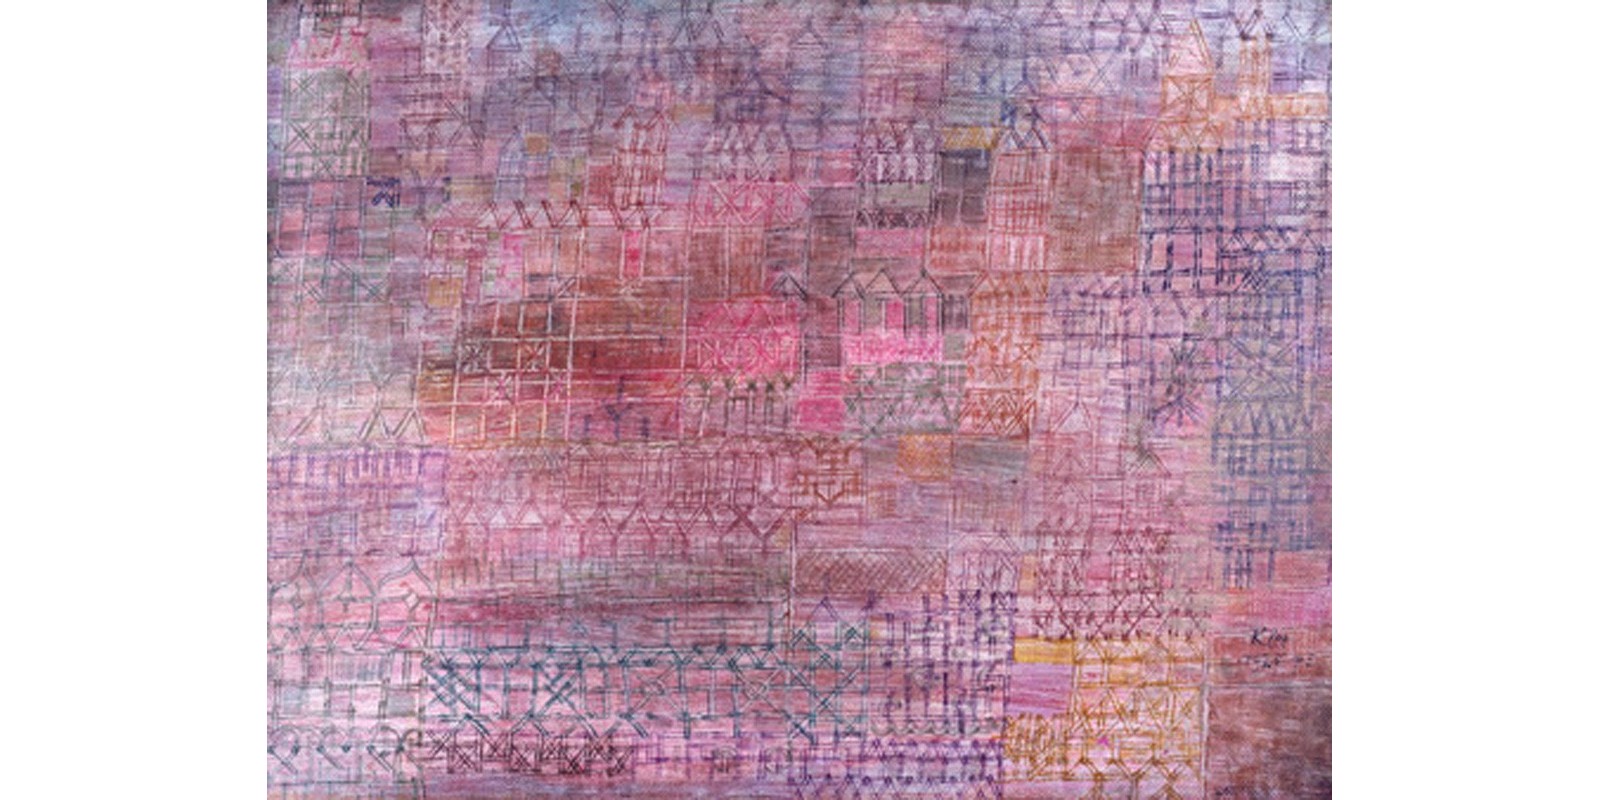 Paul Klee - Cathedrals